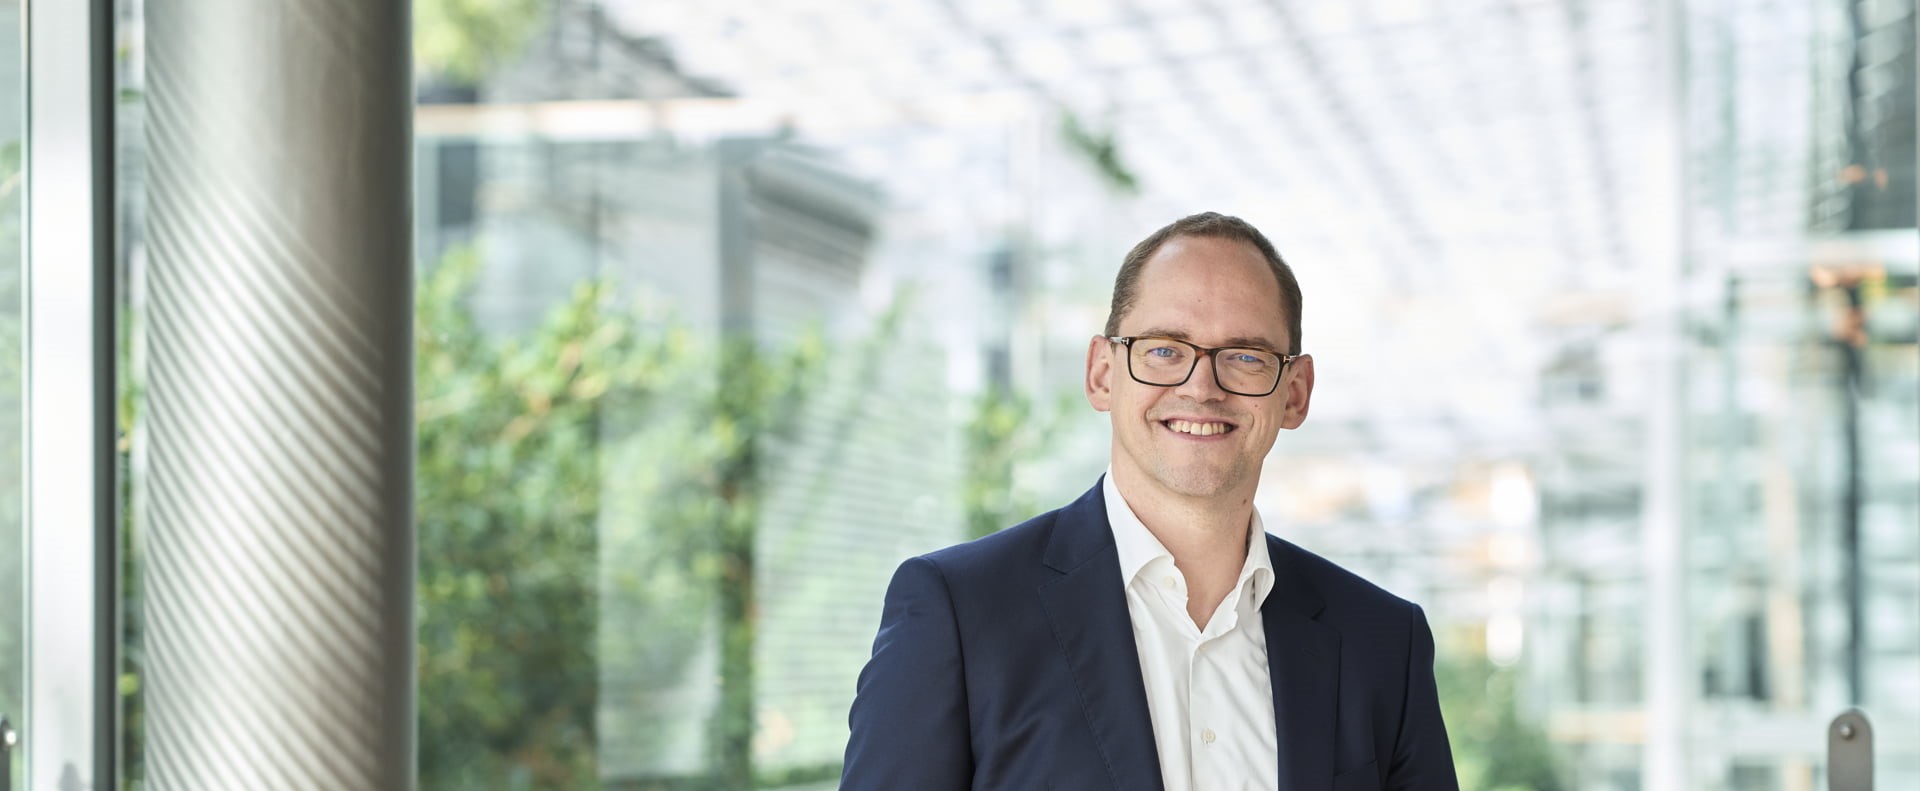 A photo of Martin Neubert, Chief Commercial Officer and Deputy Group CEO at Ørsted